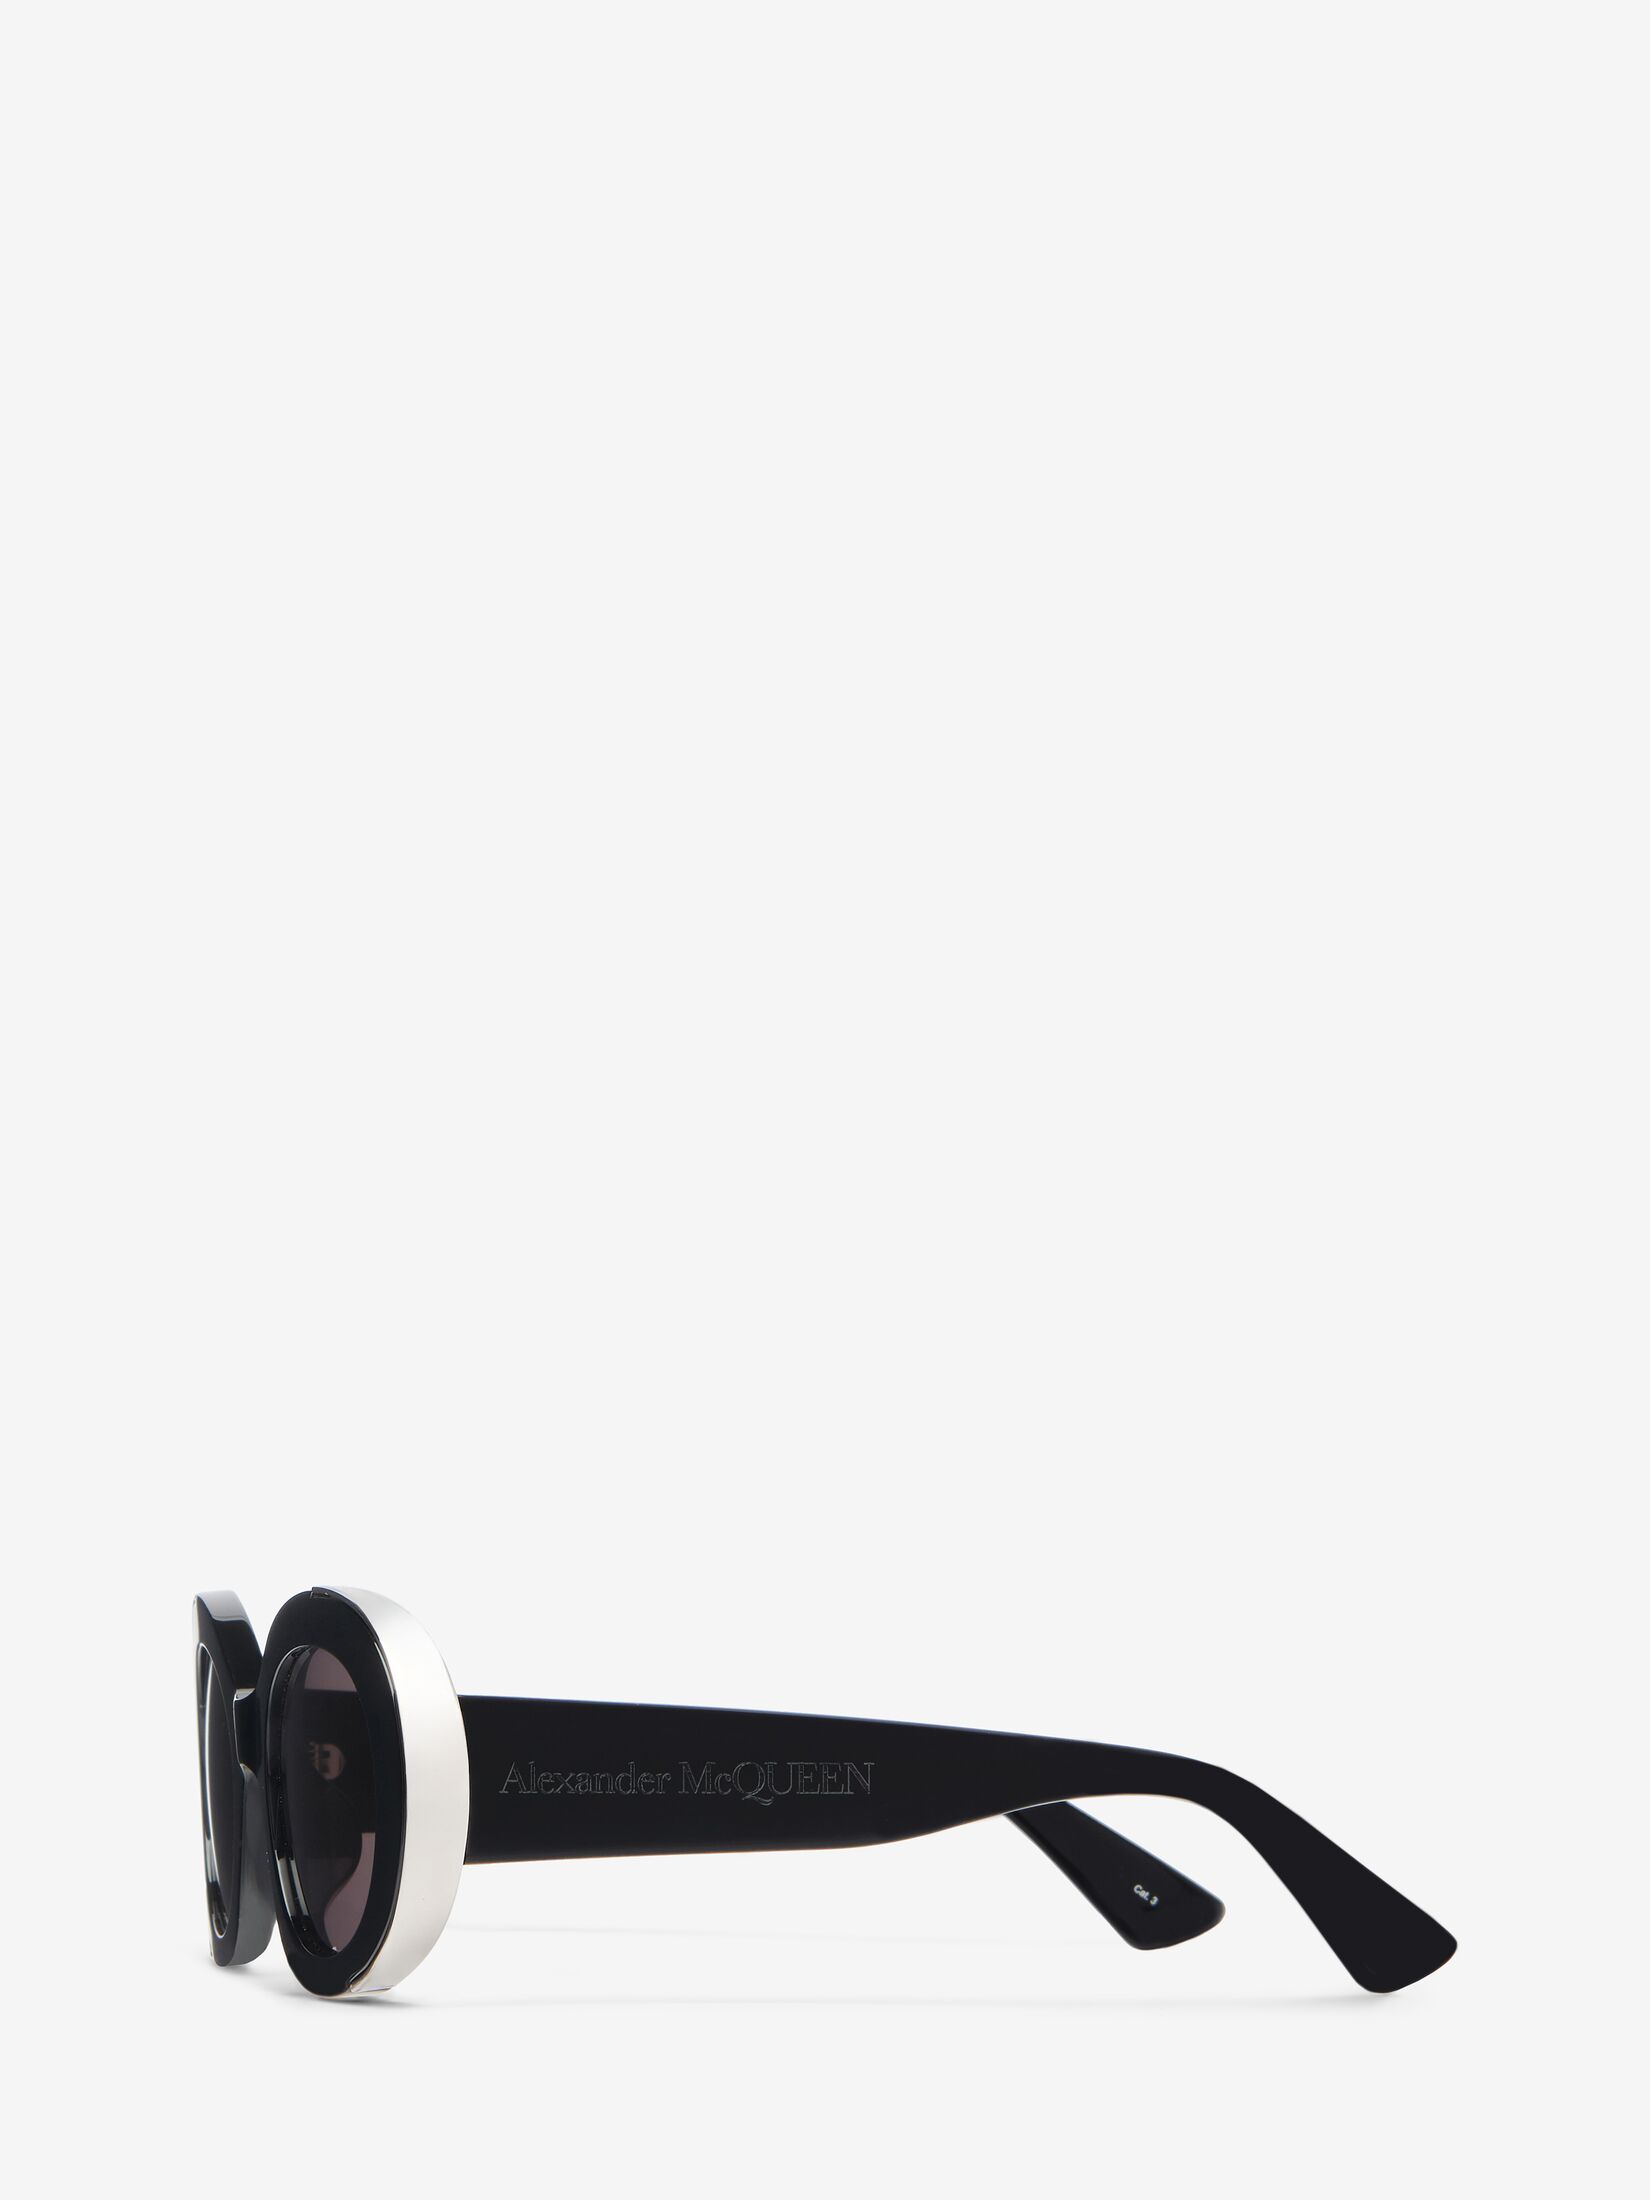 The Grip Oval Sunglasses